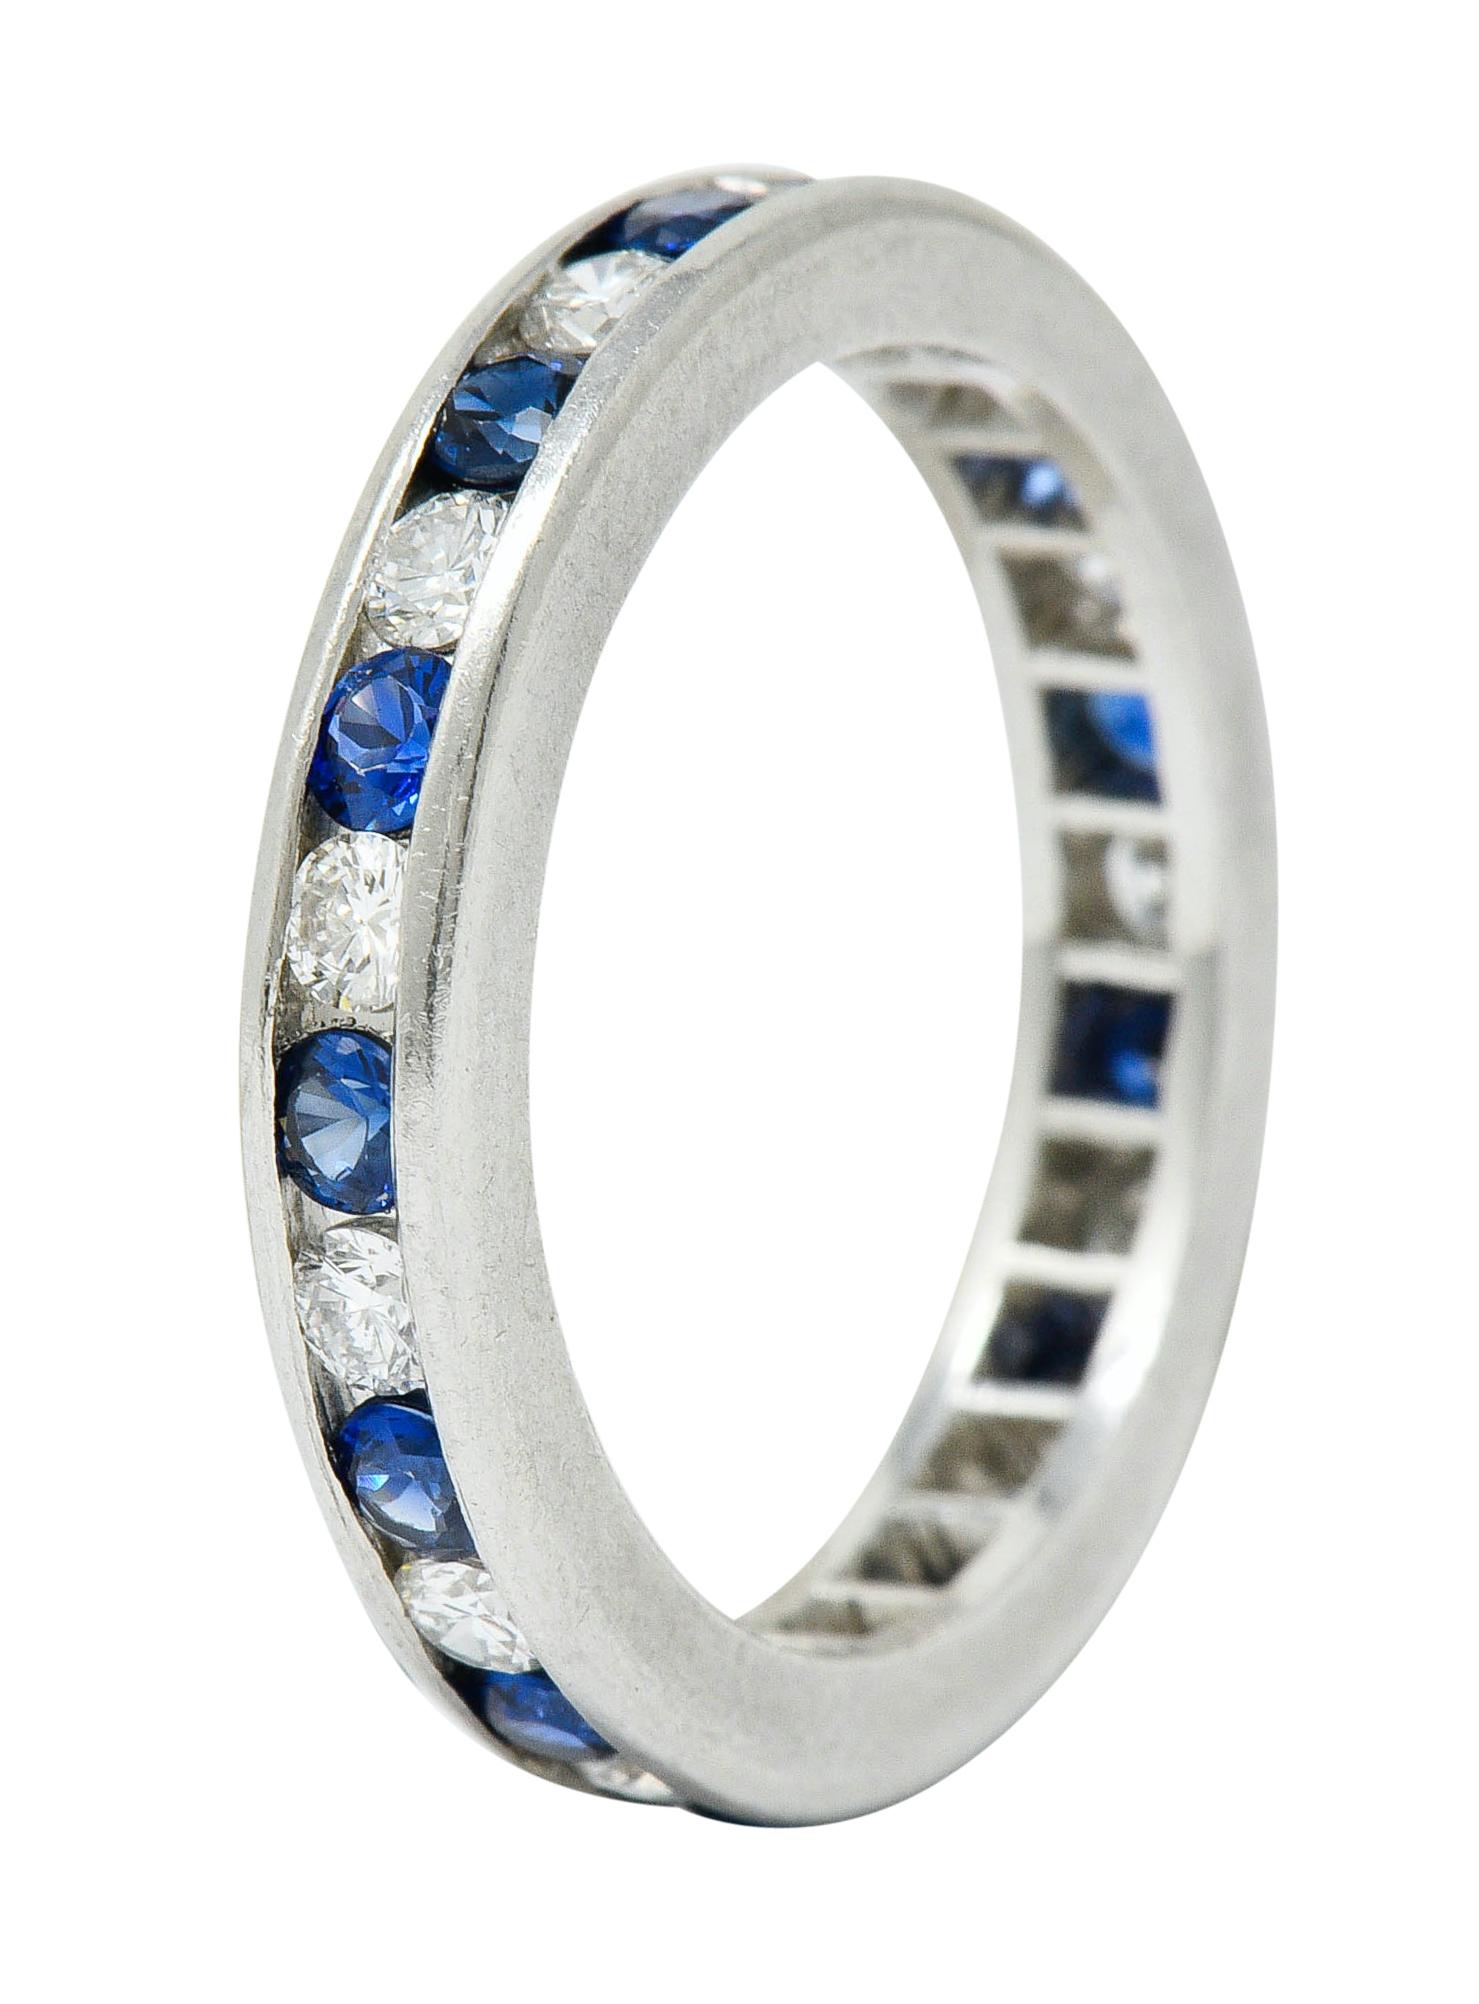 Eternity band ring channel set fully around by diamonds and sapphires, alternating

Round brilliant cut diamonds weigh in total approximately 0.40 carat; G/H color with SI clarity

Well-matched and bright royal blue sapphires weigh in total